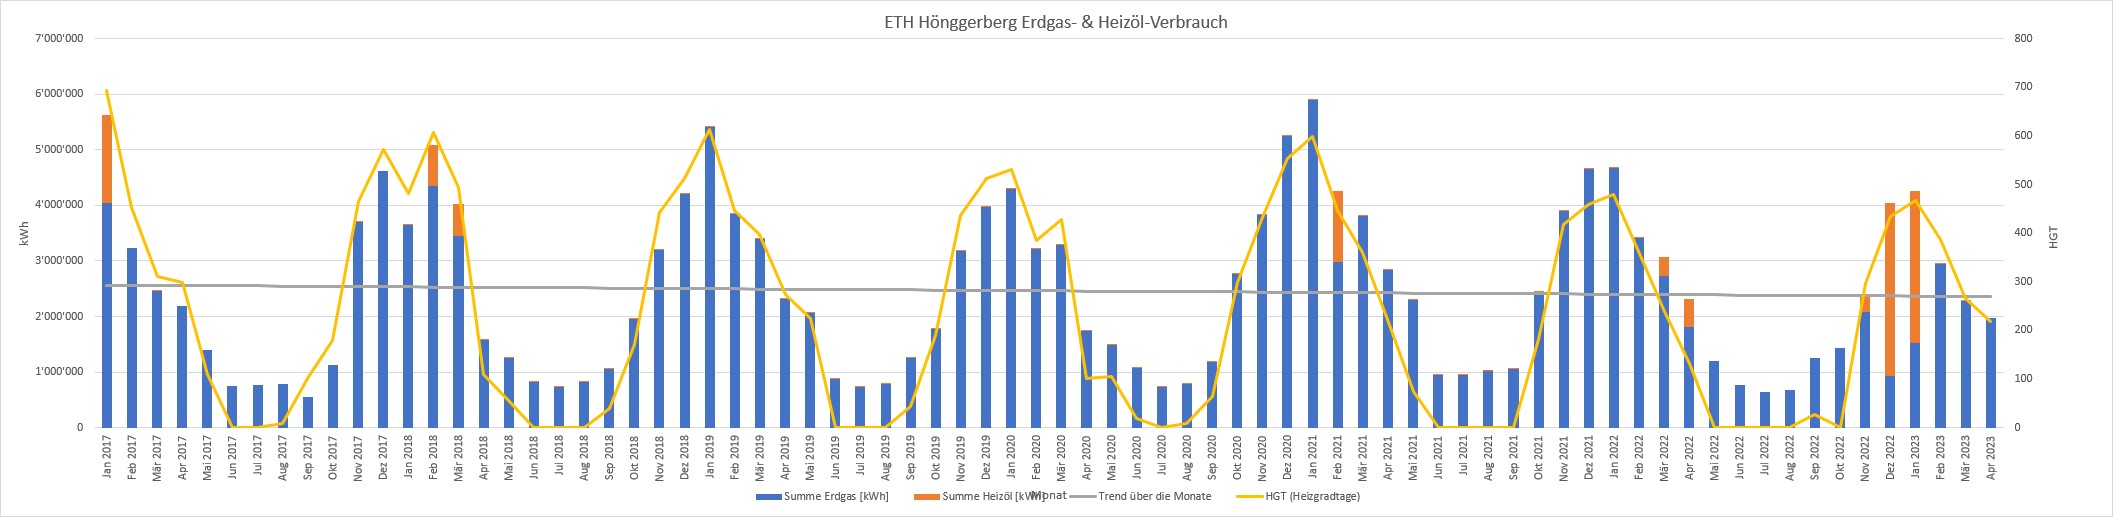 Enlarged view: Graph of natural gas & heating oil consumption for ETH Hönggerberg